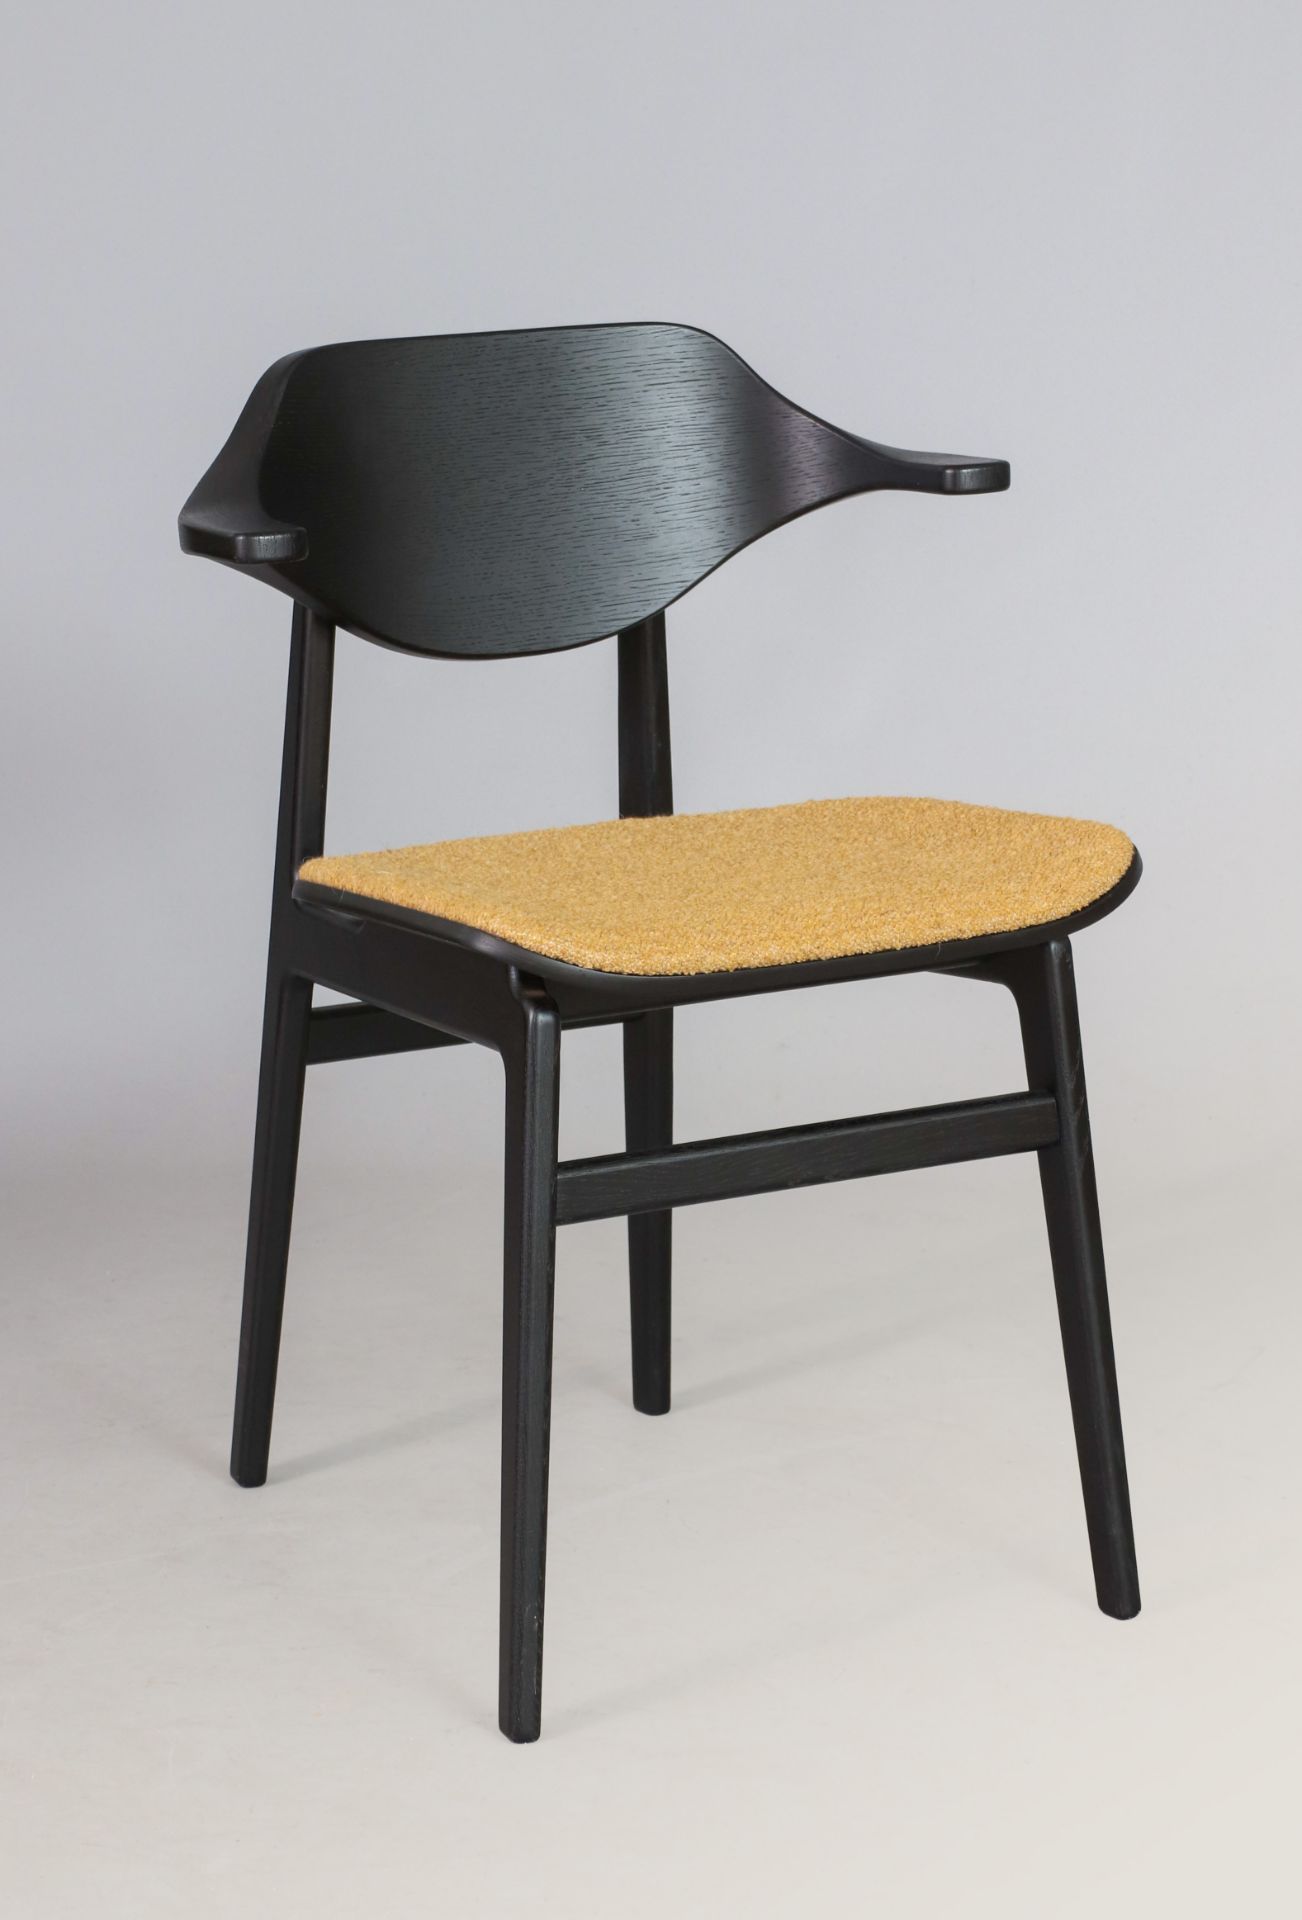 NORR11 ¨Buffalo Chair¨ - Image 2 of 6